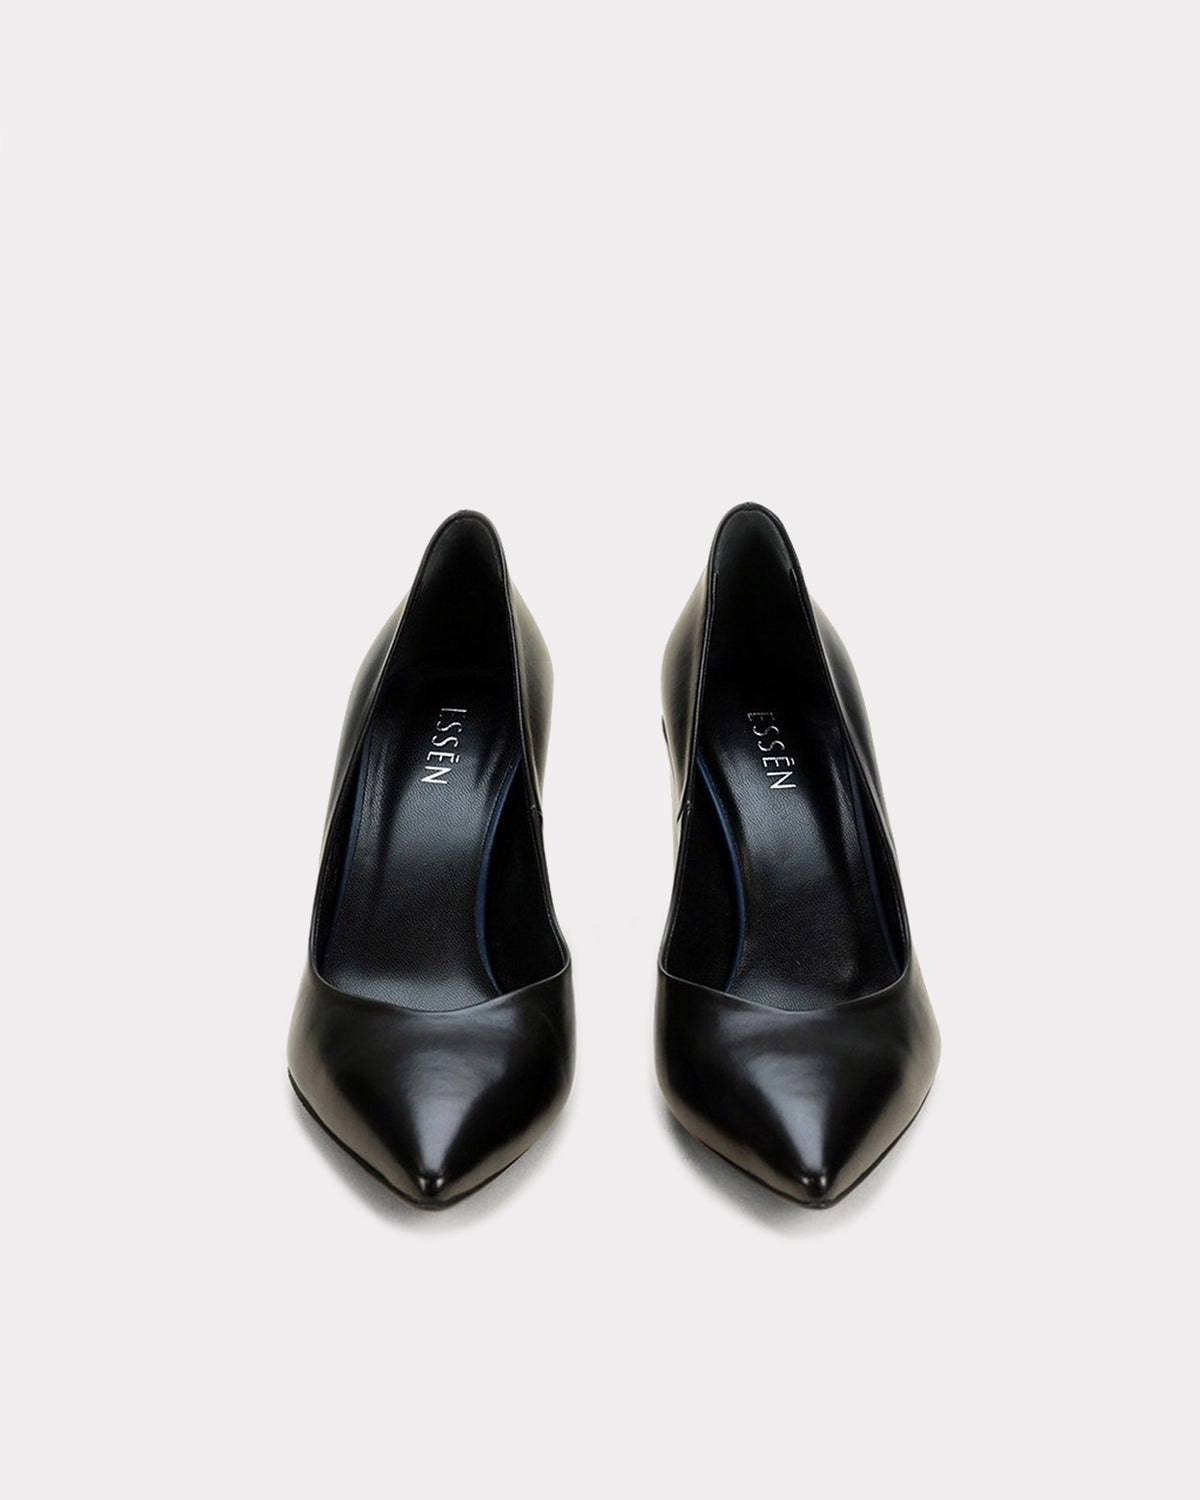 pointed toe pumps made from ethically sourced black leather